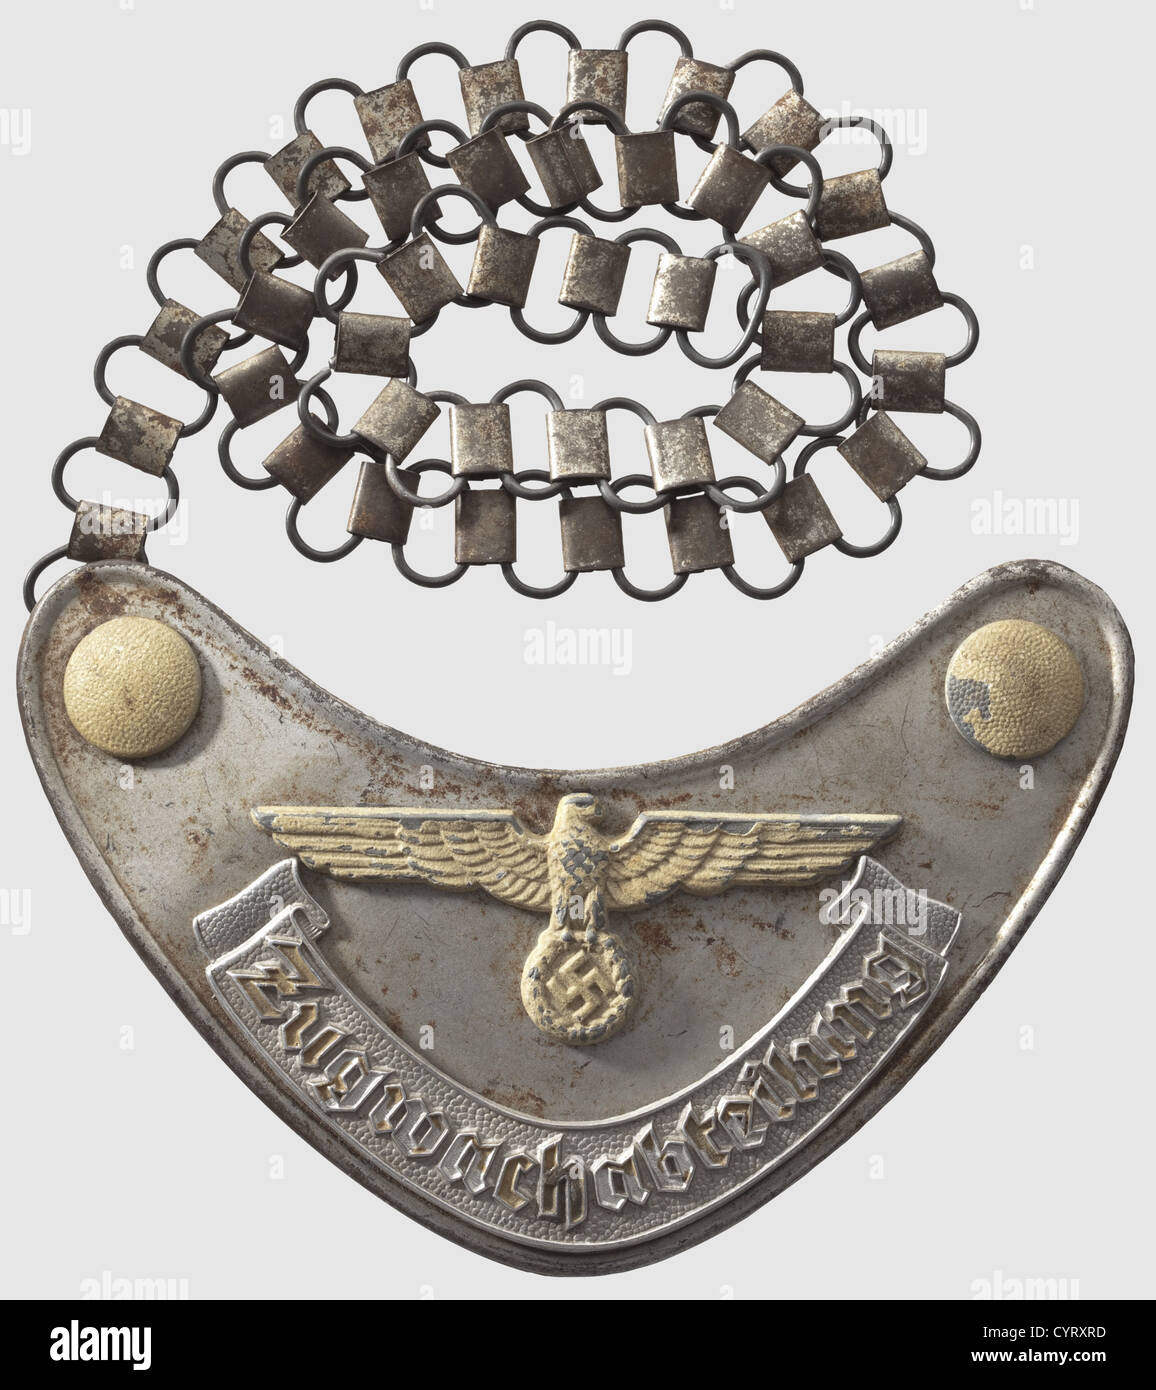 Wehrmacht, a gorget for Zugwachabteilung (train guard unit) Made of silver plated sheet iron, eagle, buttons and lettering coated with phosphorescent paint, all appliqués affixed by pins. Reverse cloth covering, one of the two securing hooks with maker 'M' in a square, iron chain for wear. Obviously used, in untouched original condition, historic, historical, 1930s, 1930s, 20th century, army, armies, armed forces, military, militaria, object, objects, stills, clipping, clippings, cut out, cut-out, cut-outs, insignia, symbols, symbol, emblem, emblems, Additional-Rights-Clearences-Not Available Stock Photo